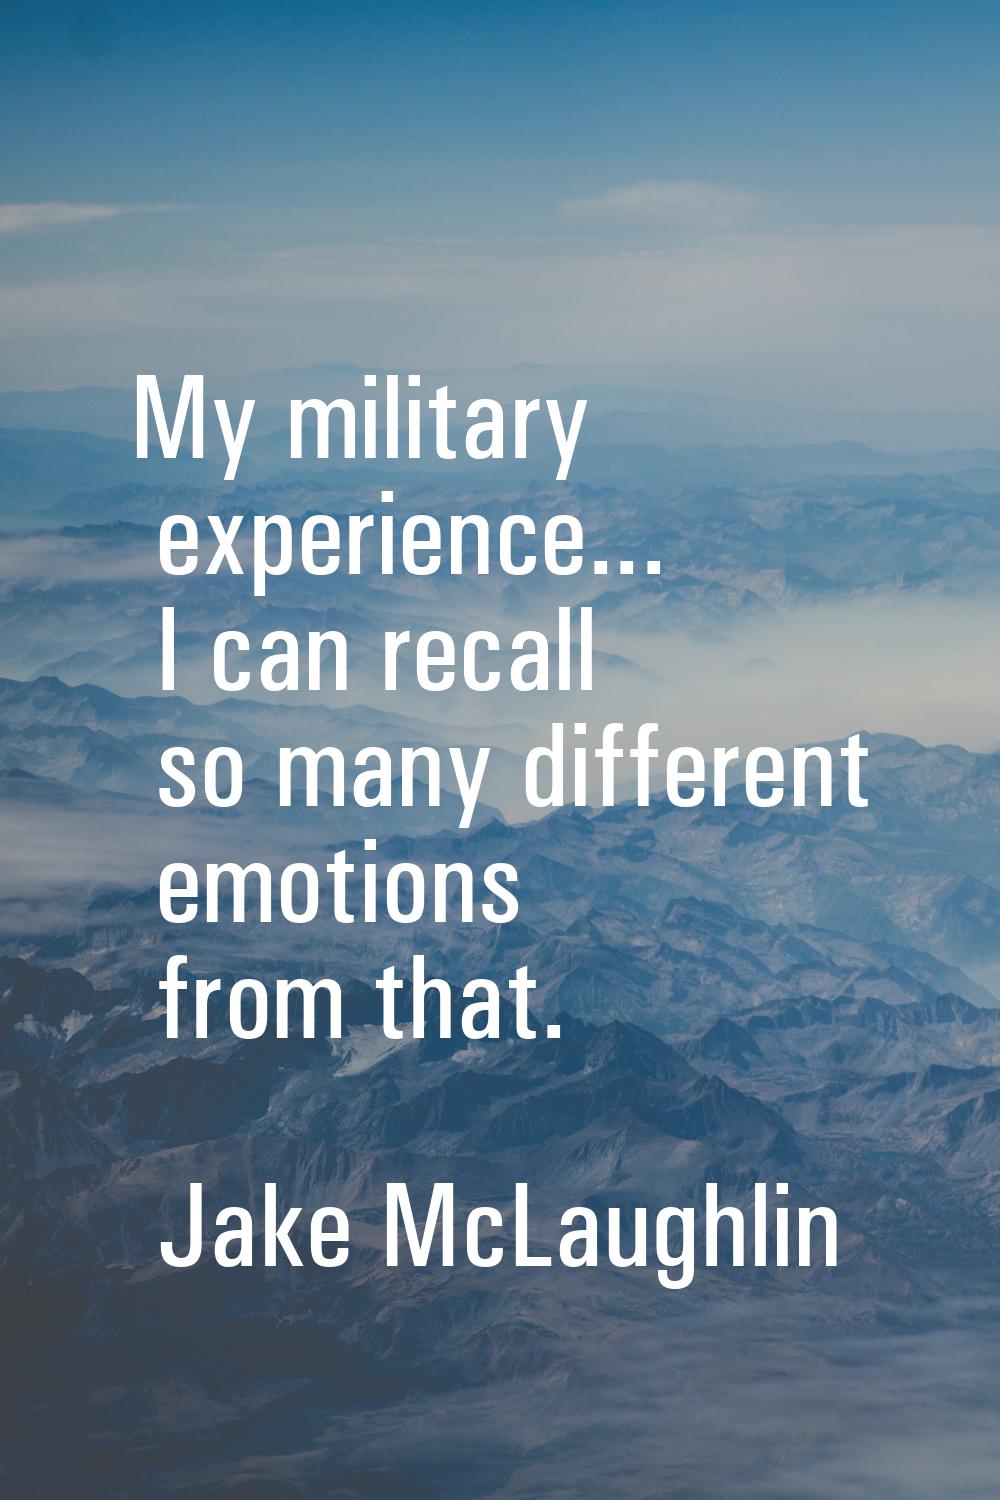 My military experience... I can recall so many different emotions from that.